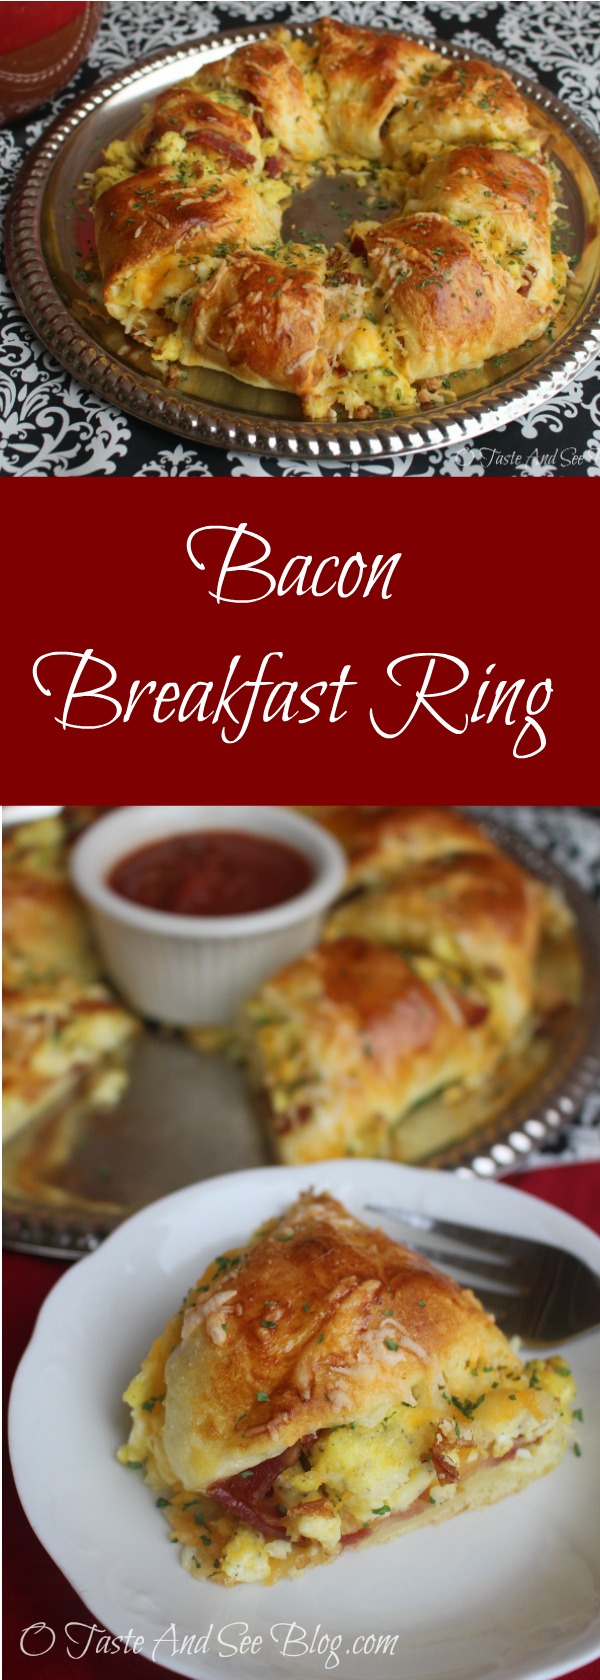 Bacon Breakfast Ring #ad #MadeWithLove #HEB